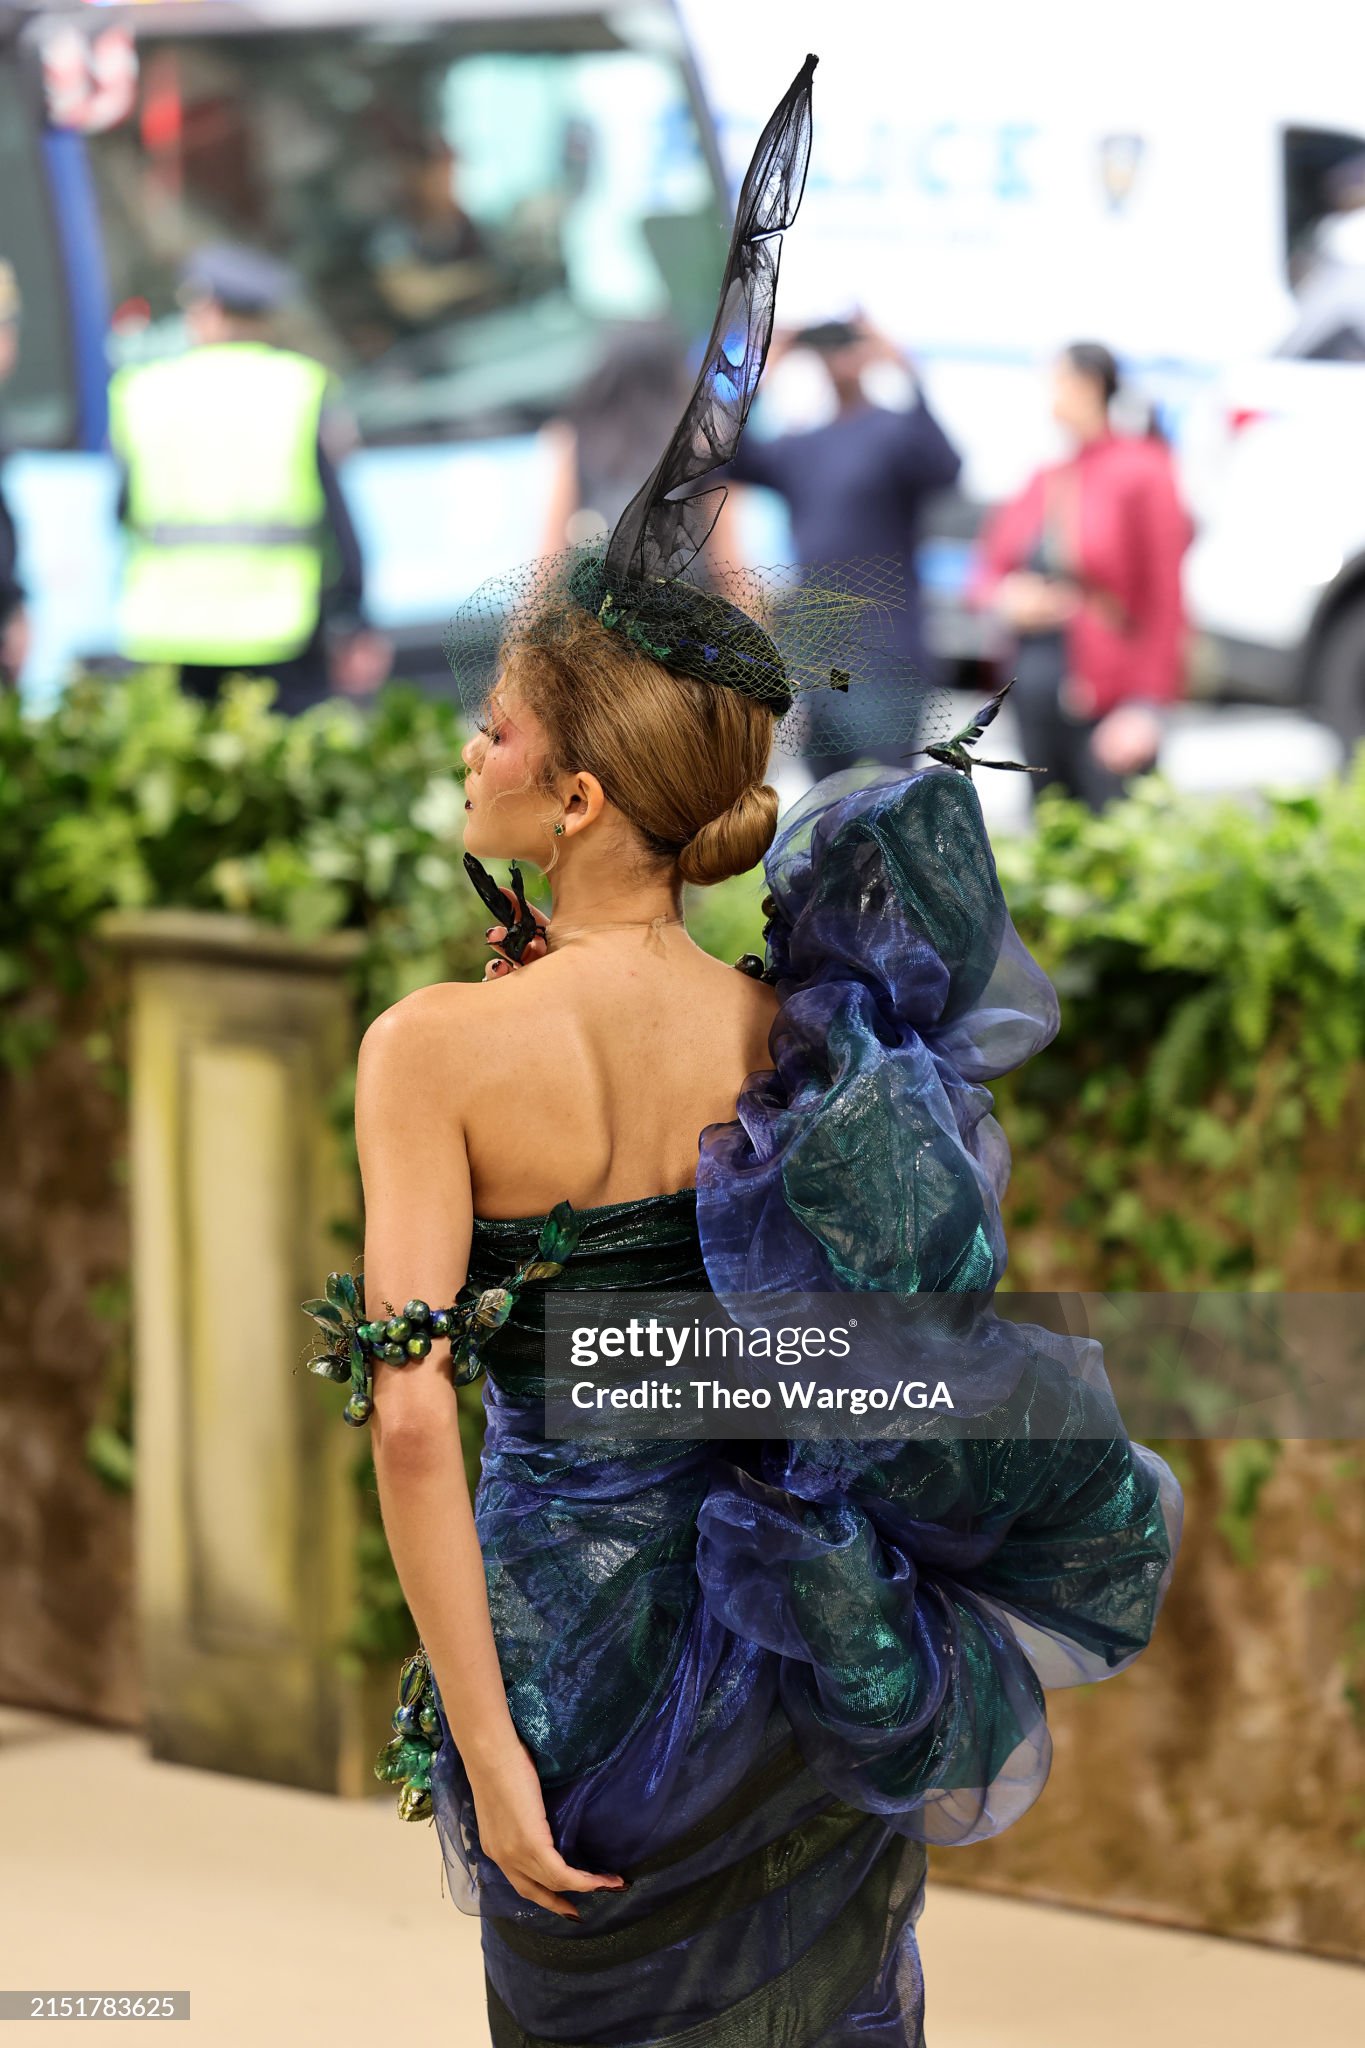 gettyimages-2151783625-2048x2048.jpg